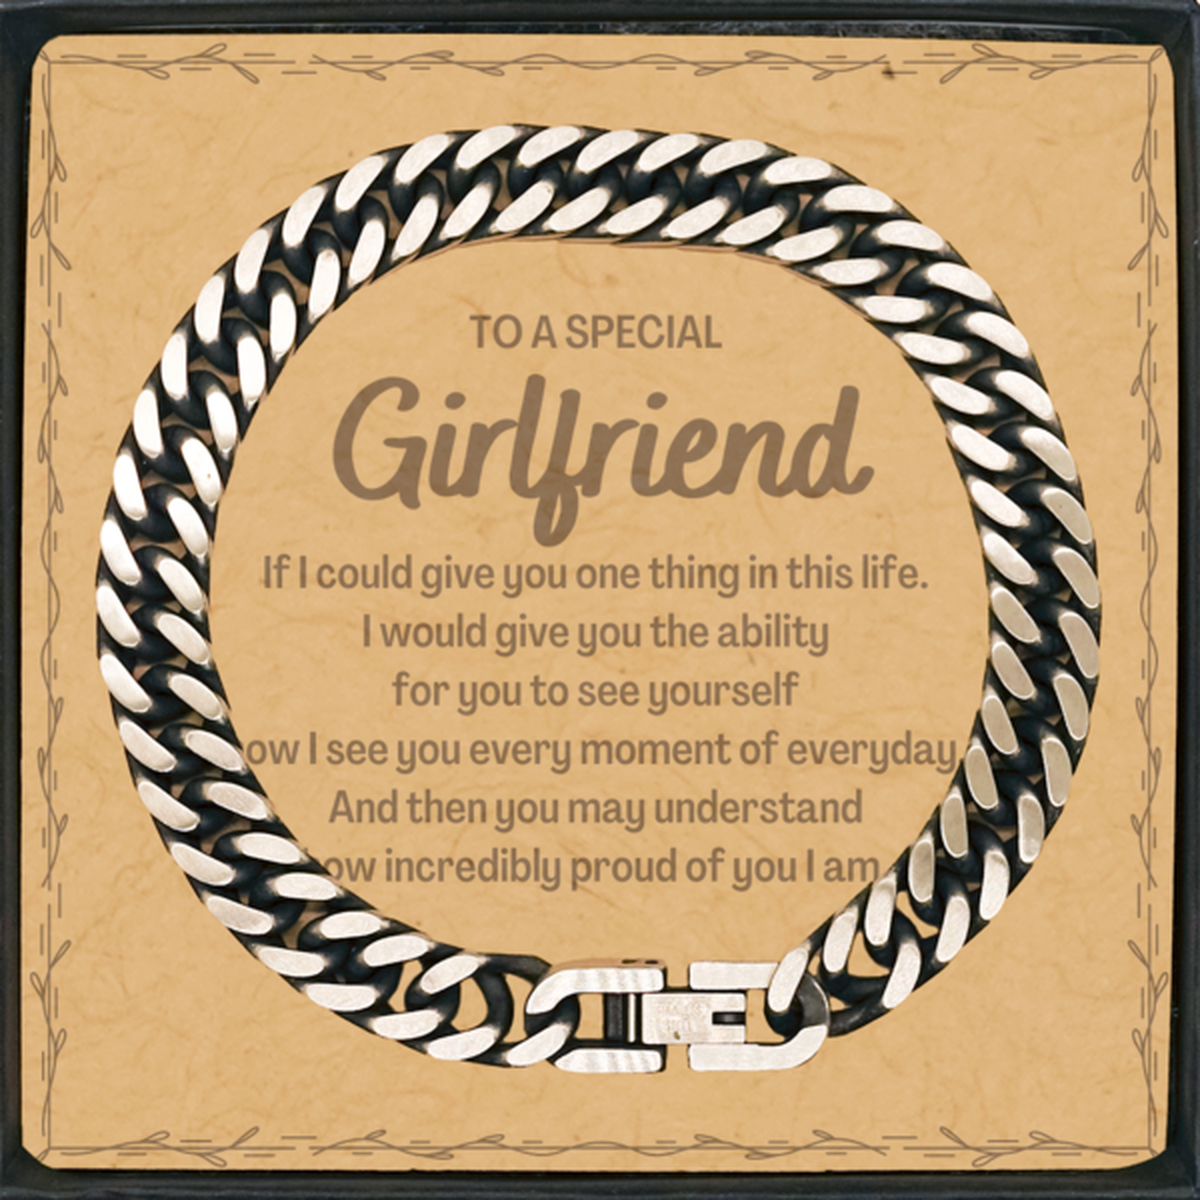 To My Girlfriend Cuban Link Chain Bracelet, Gifts For Girlfriend Message Card, Inspirational Gifts for Christmas Birthday, Epic Gifts for Girlfriend To A Special Girlfriend how incredibly proud of you I am